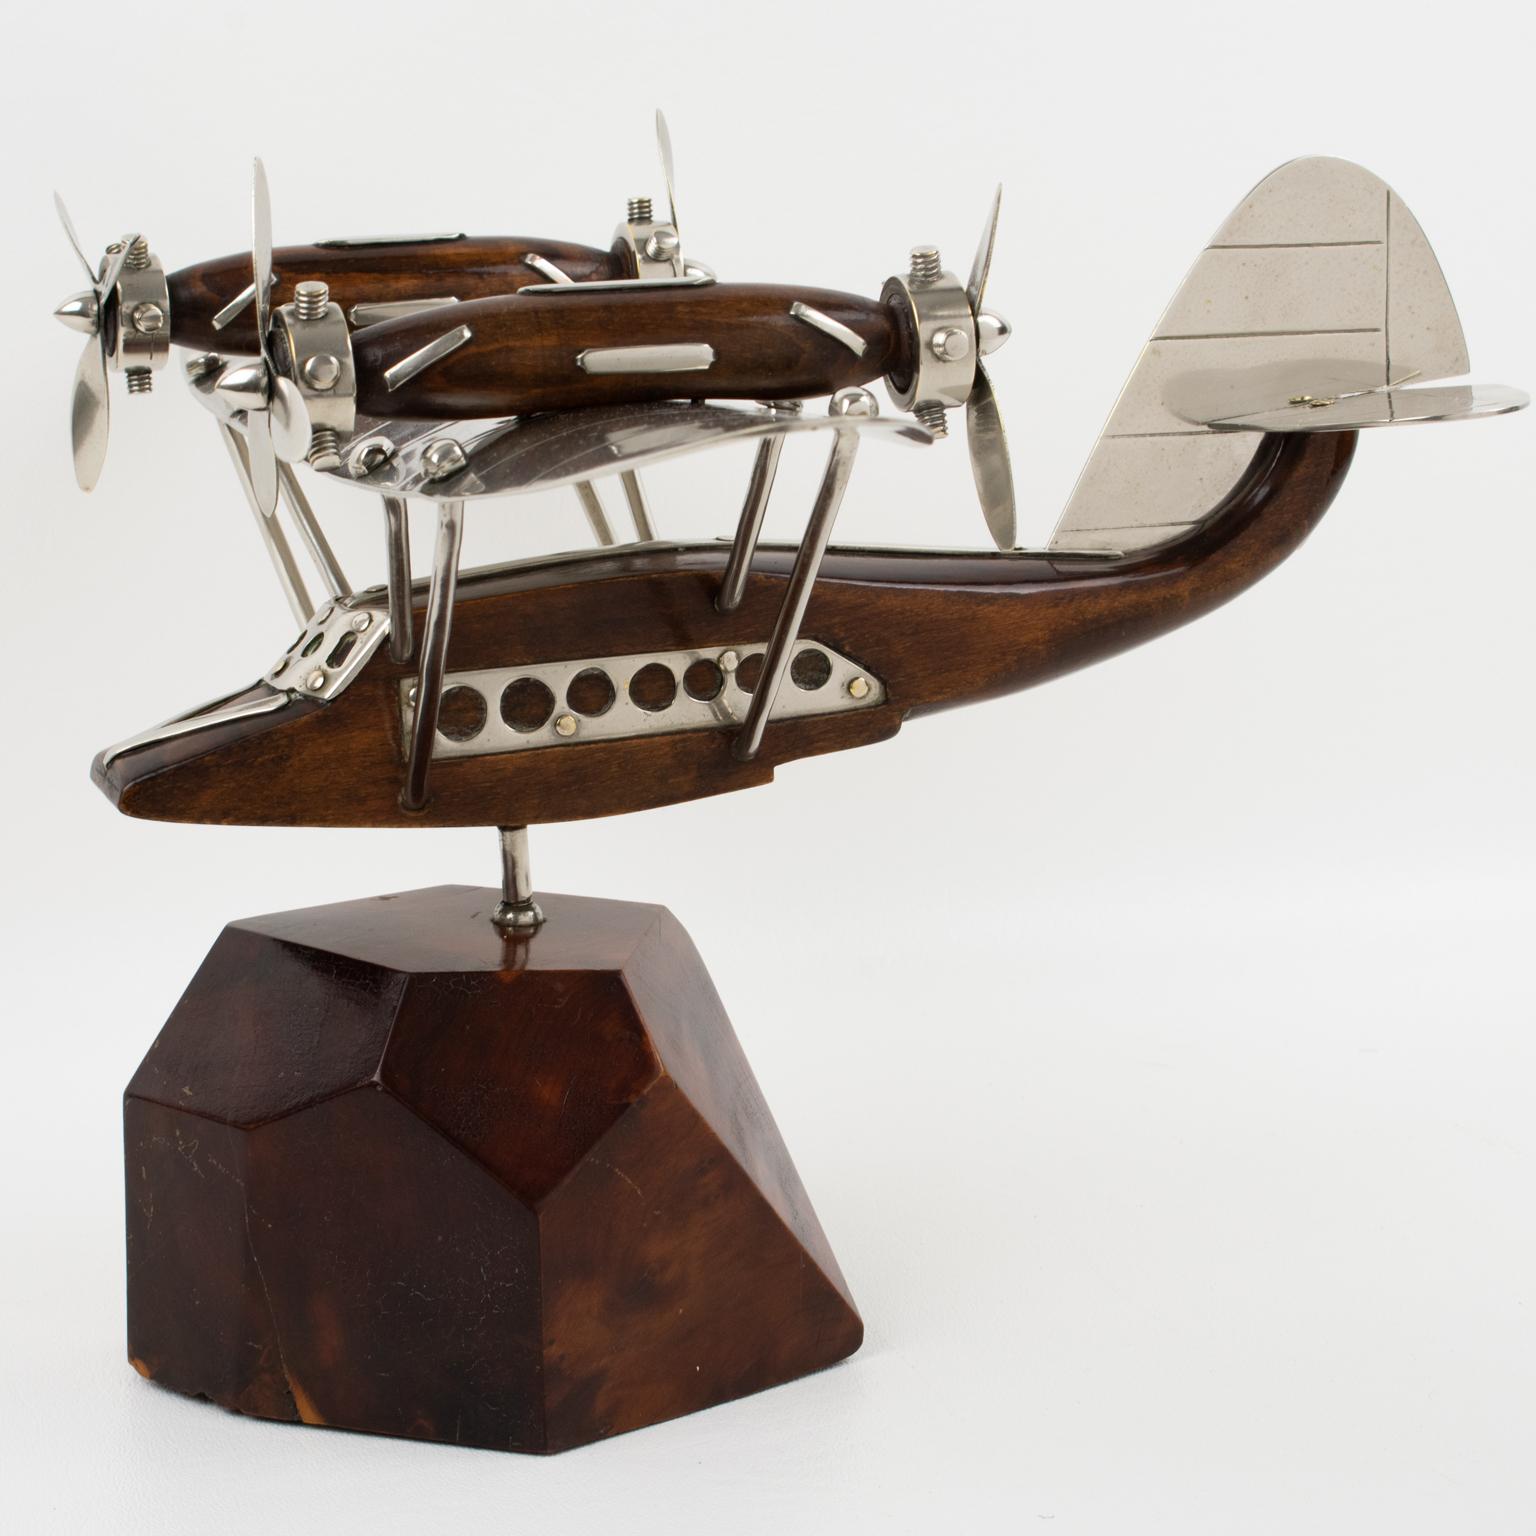 A fantastic French Art Deco chrome and wood airplane/seaplane model mounted on a stylized wood plinth. A superbly crafted rendering of the legendary quadri-propellers seaplane, strikingly evocative of a golden age in air travel. This handsome 1940s